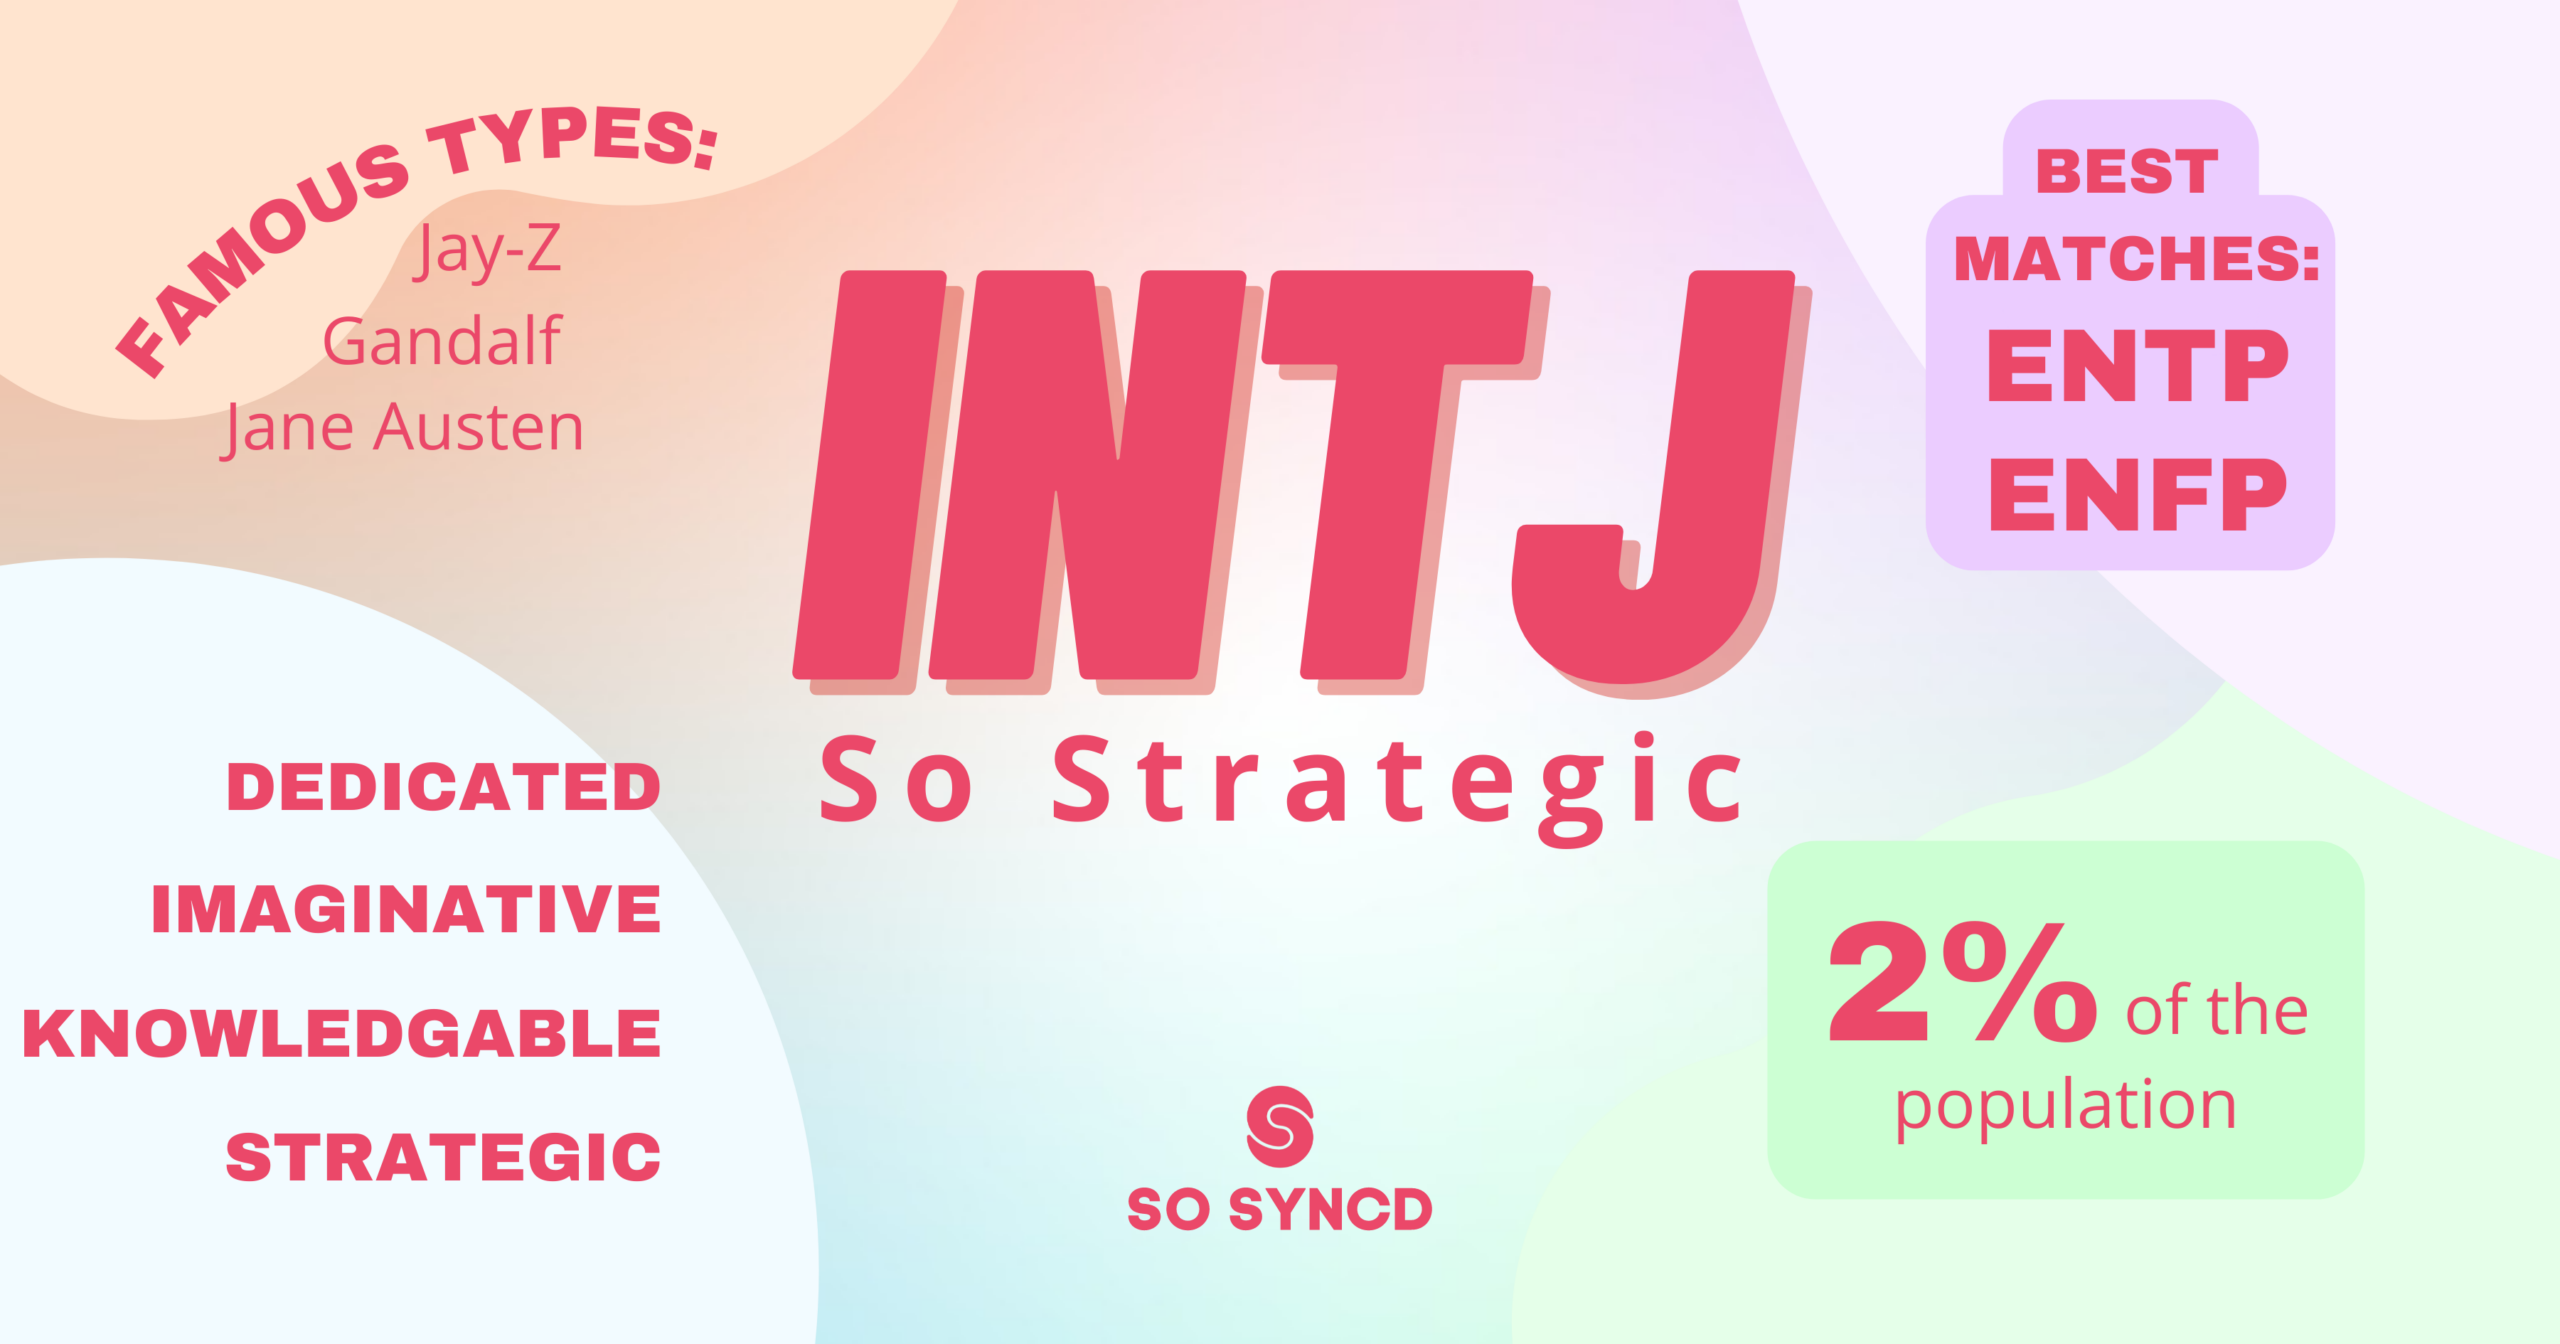 What is an INTJ?. Where does INTJ come from? A long test…